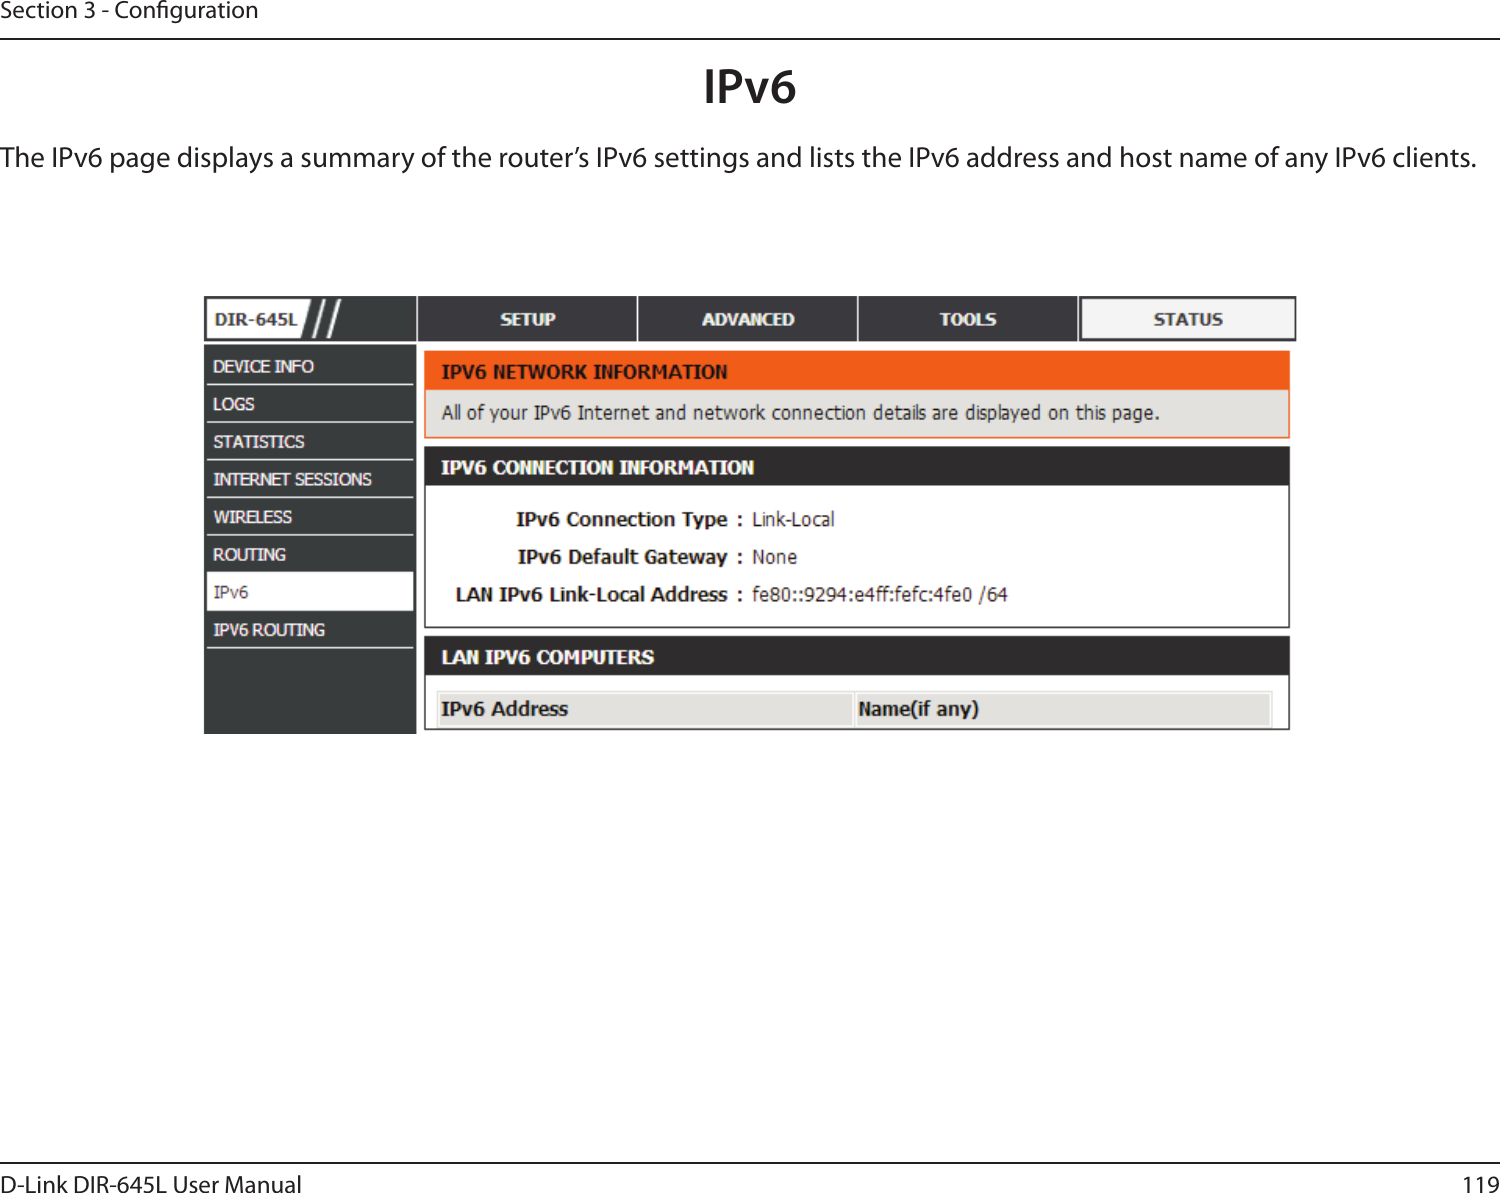 119D-Link DIR-645L User ManualSection 3 - CongurationIPv6The IPv6 page displays a summary of the router’s IPv6 settings and lists the IPv6 address and host name of any IPv6 clients. 